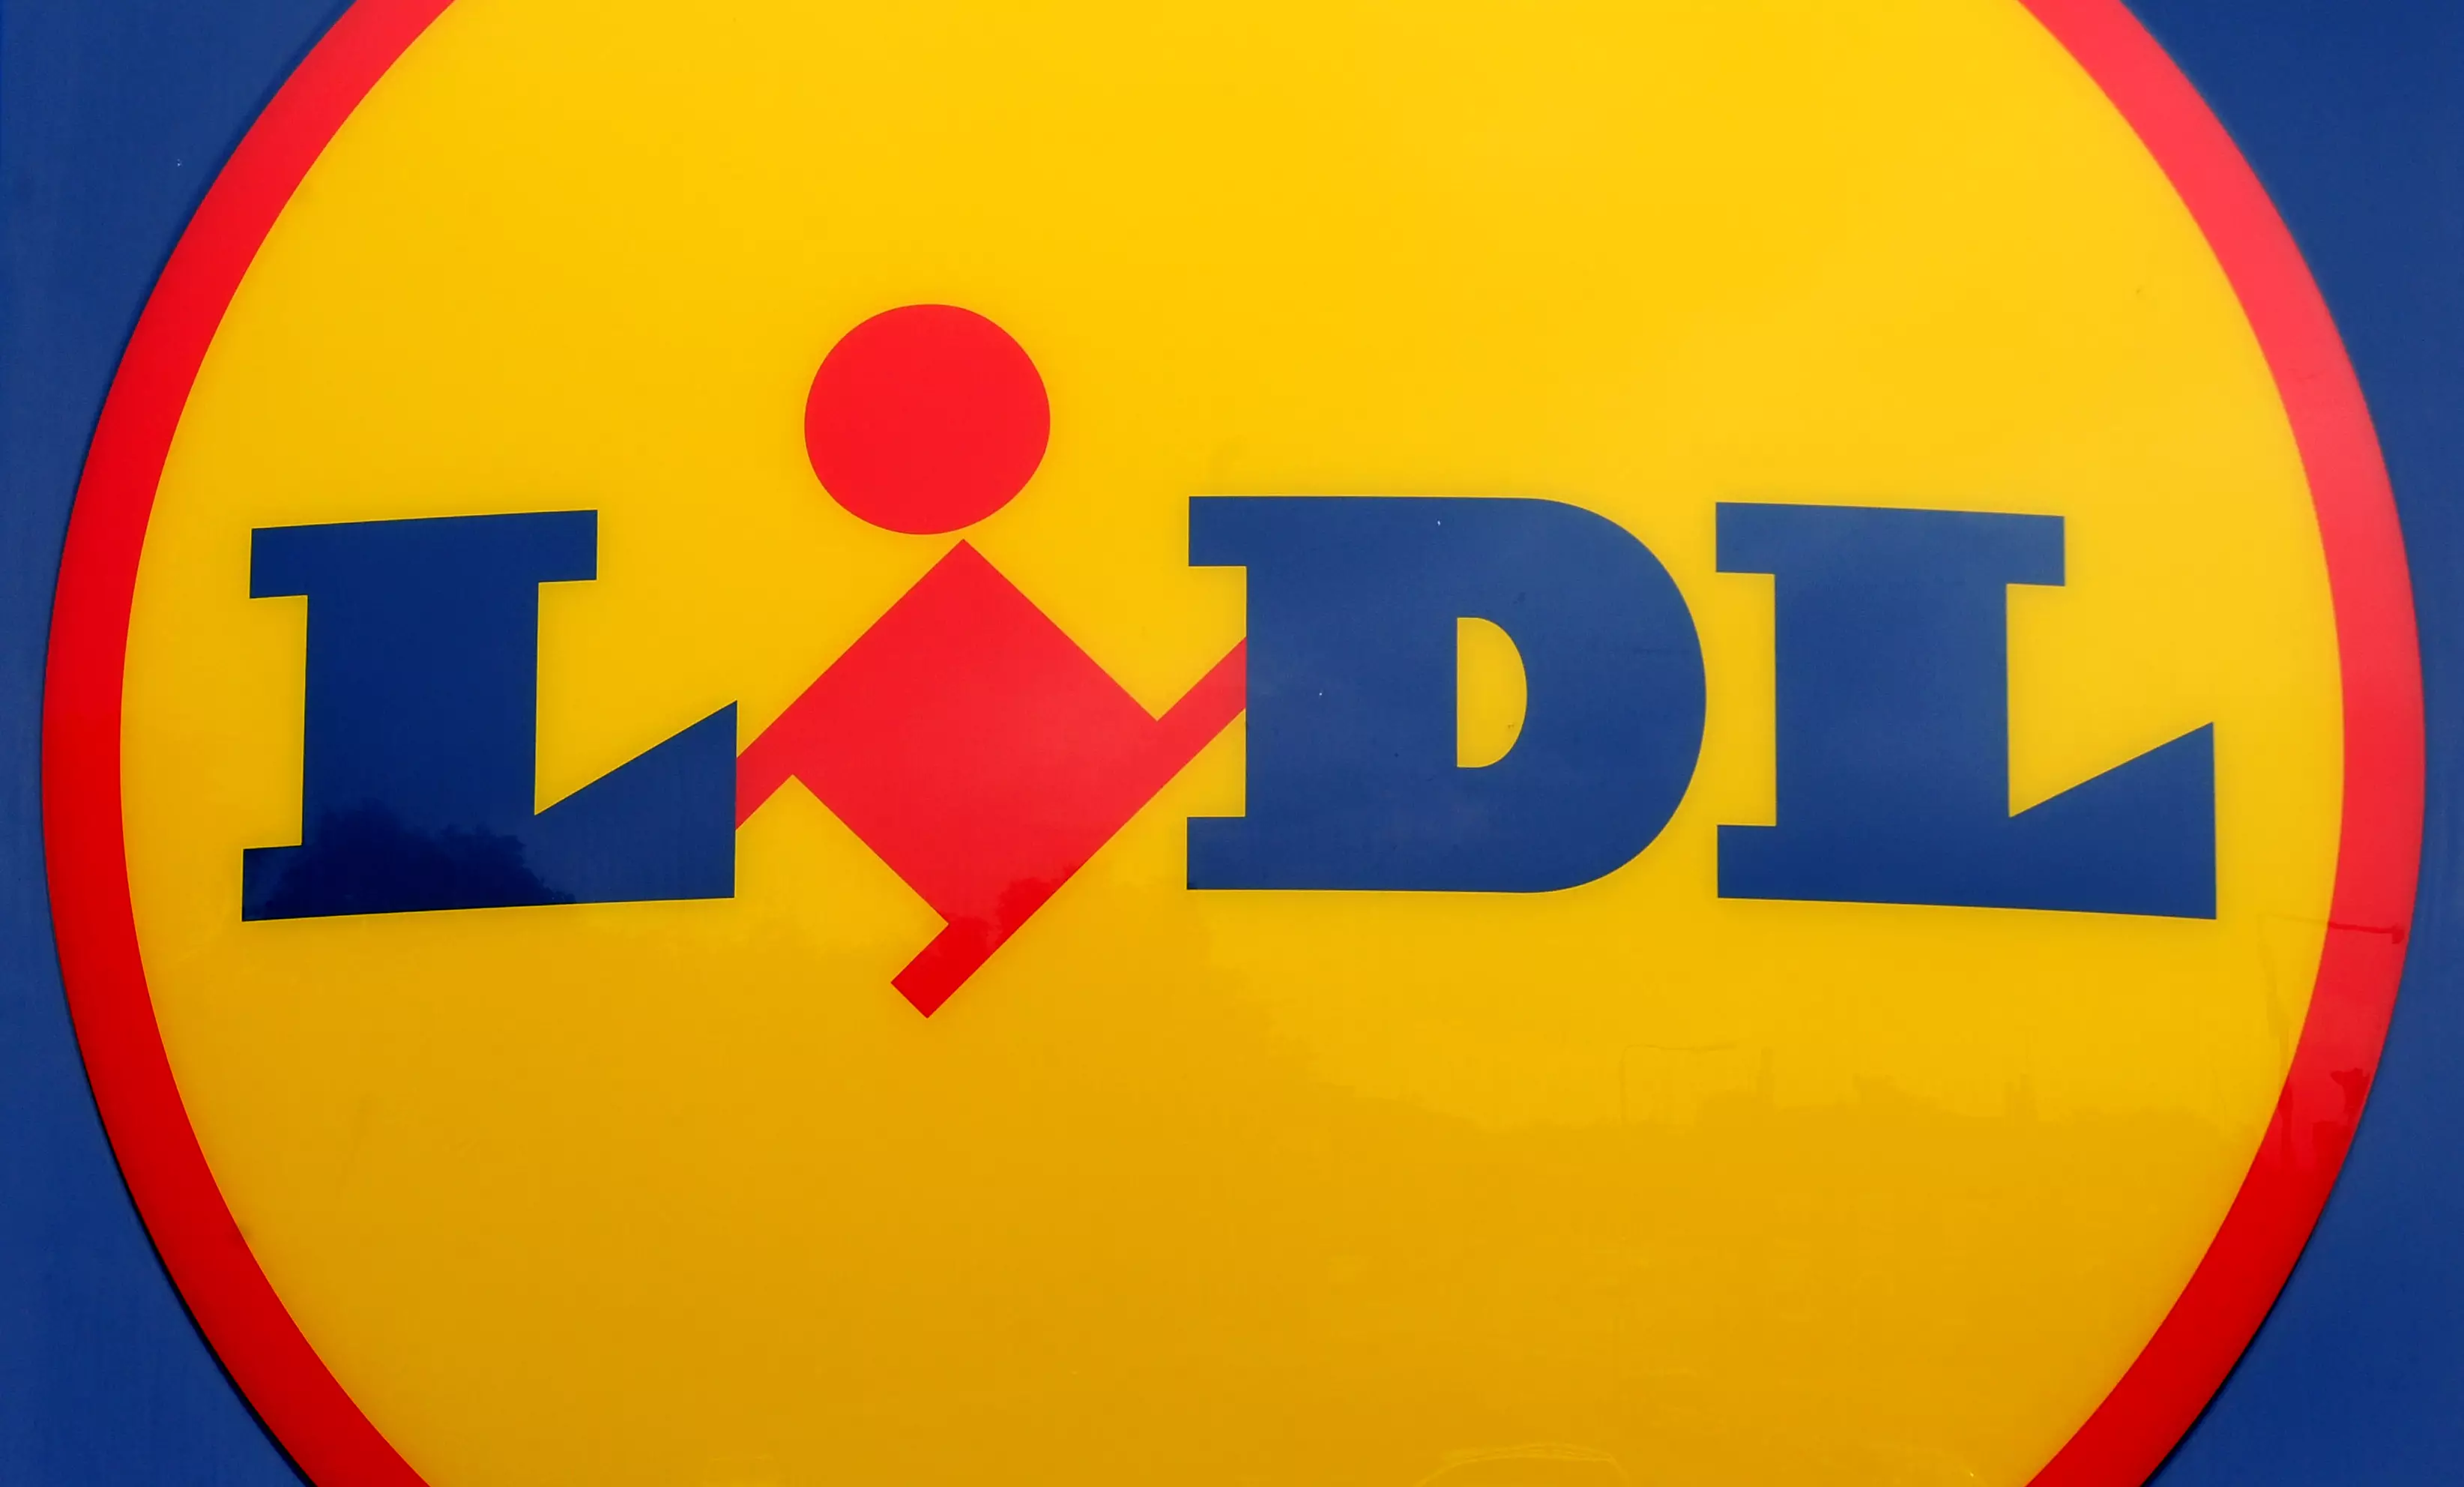 Lidl Has Become The First Supermarket To Pay The Living Wage Foundation Rate